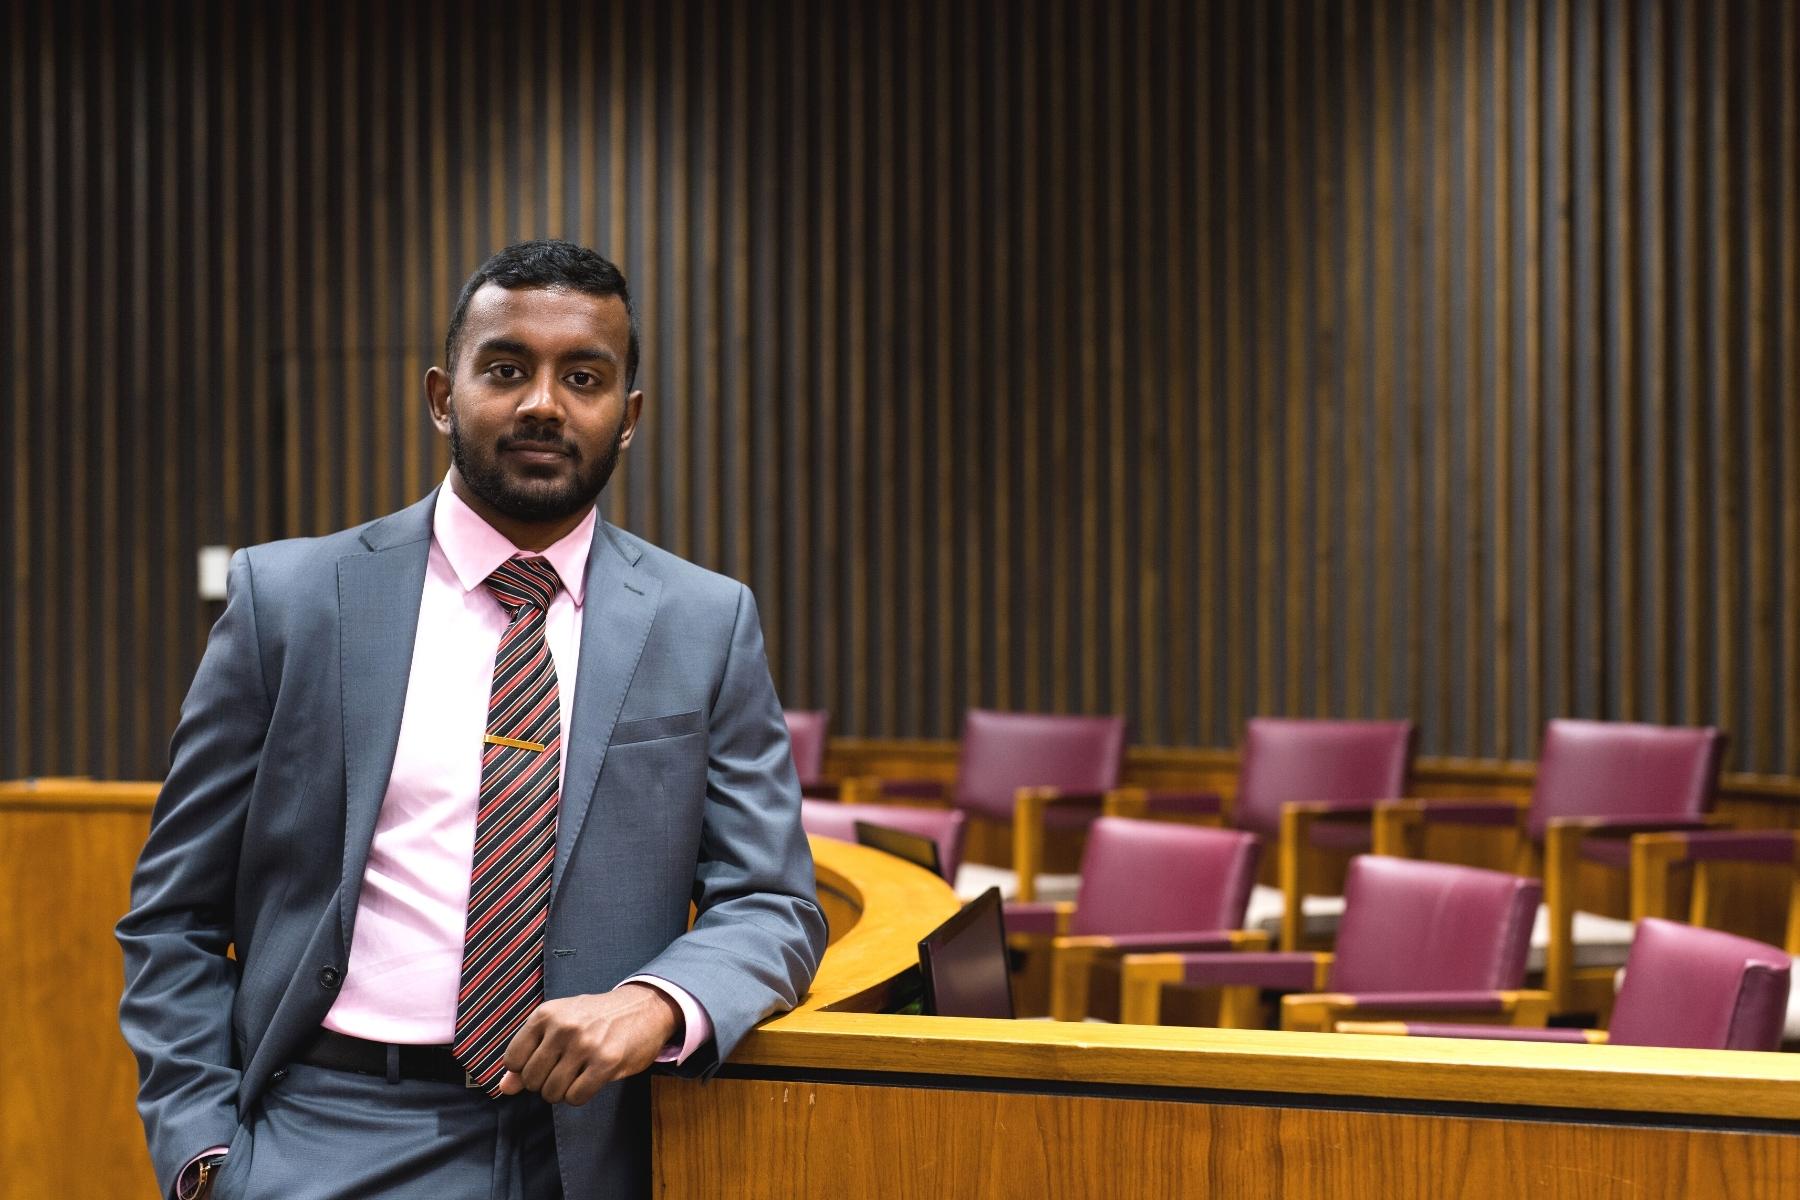 Wayne Law graduating student Muthu Veerappan standing in court